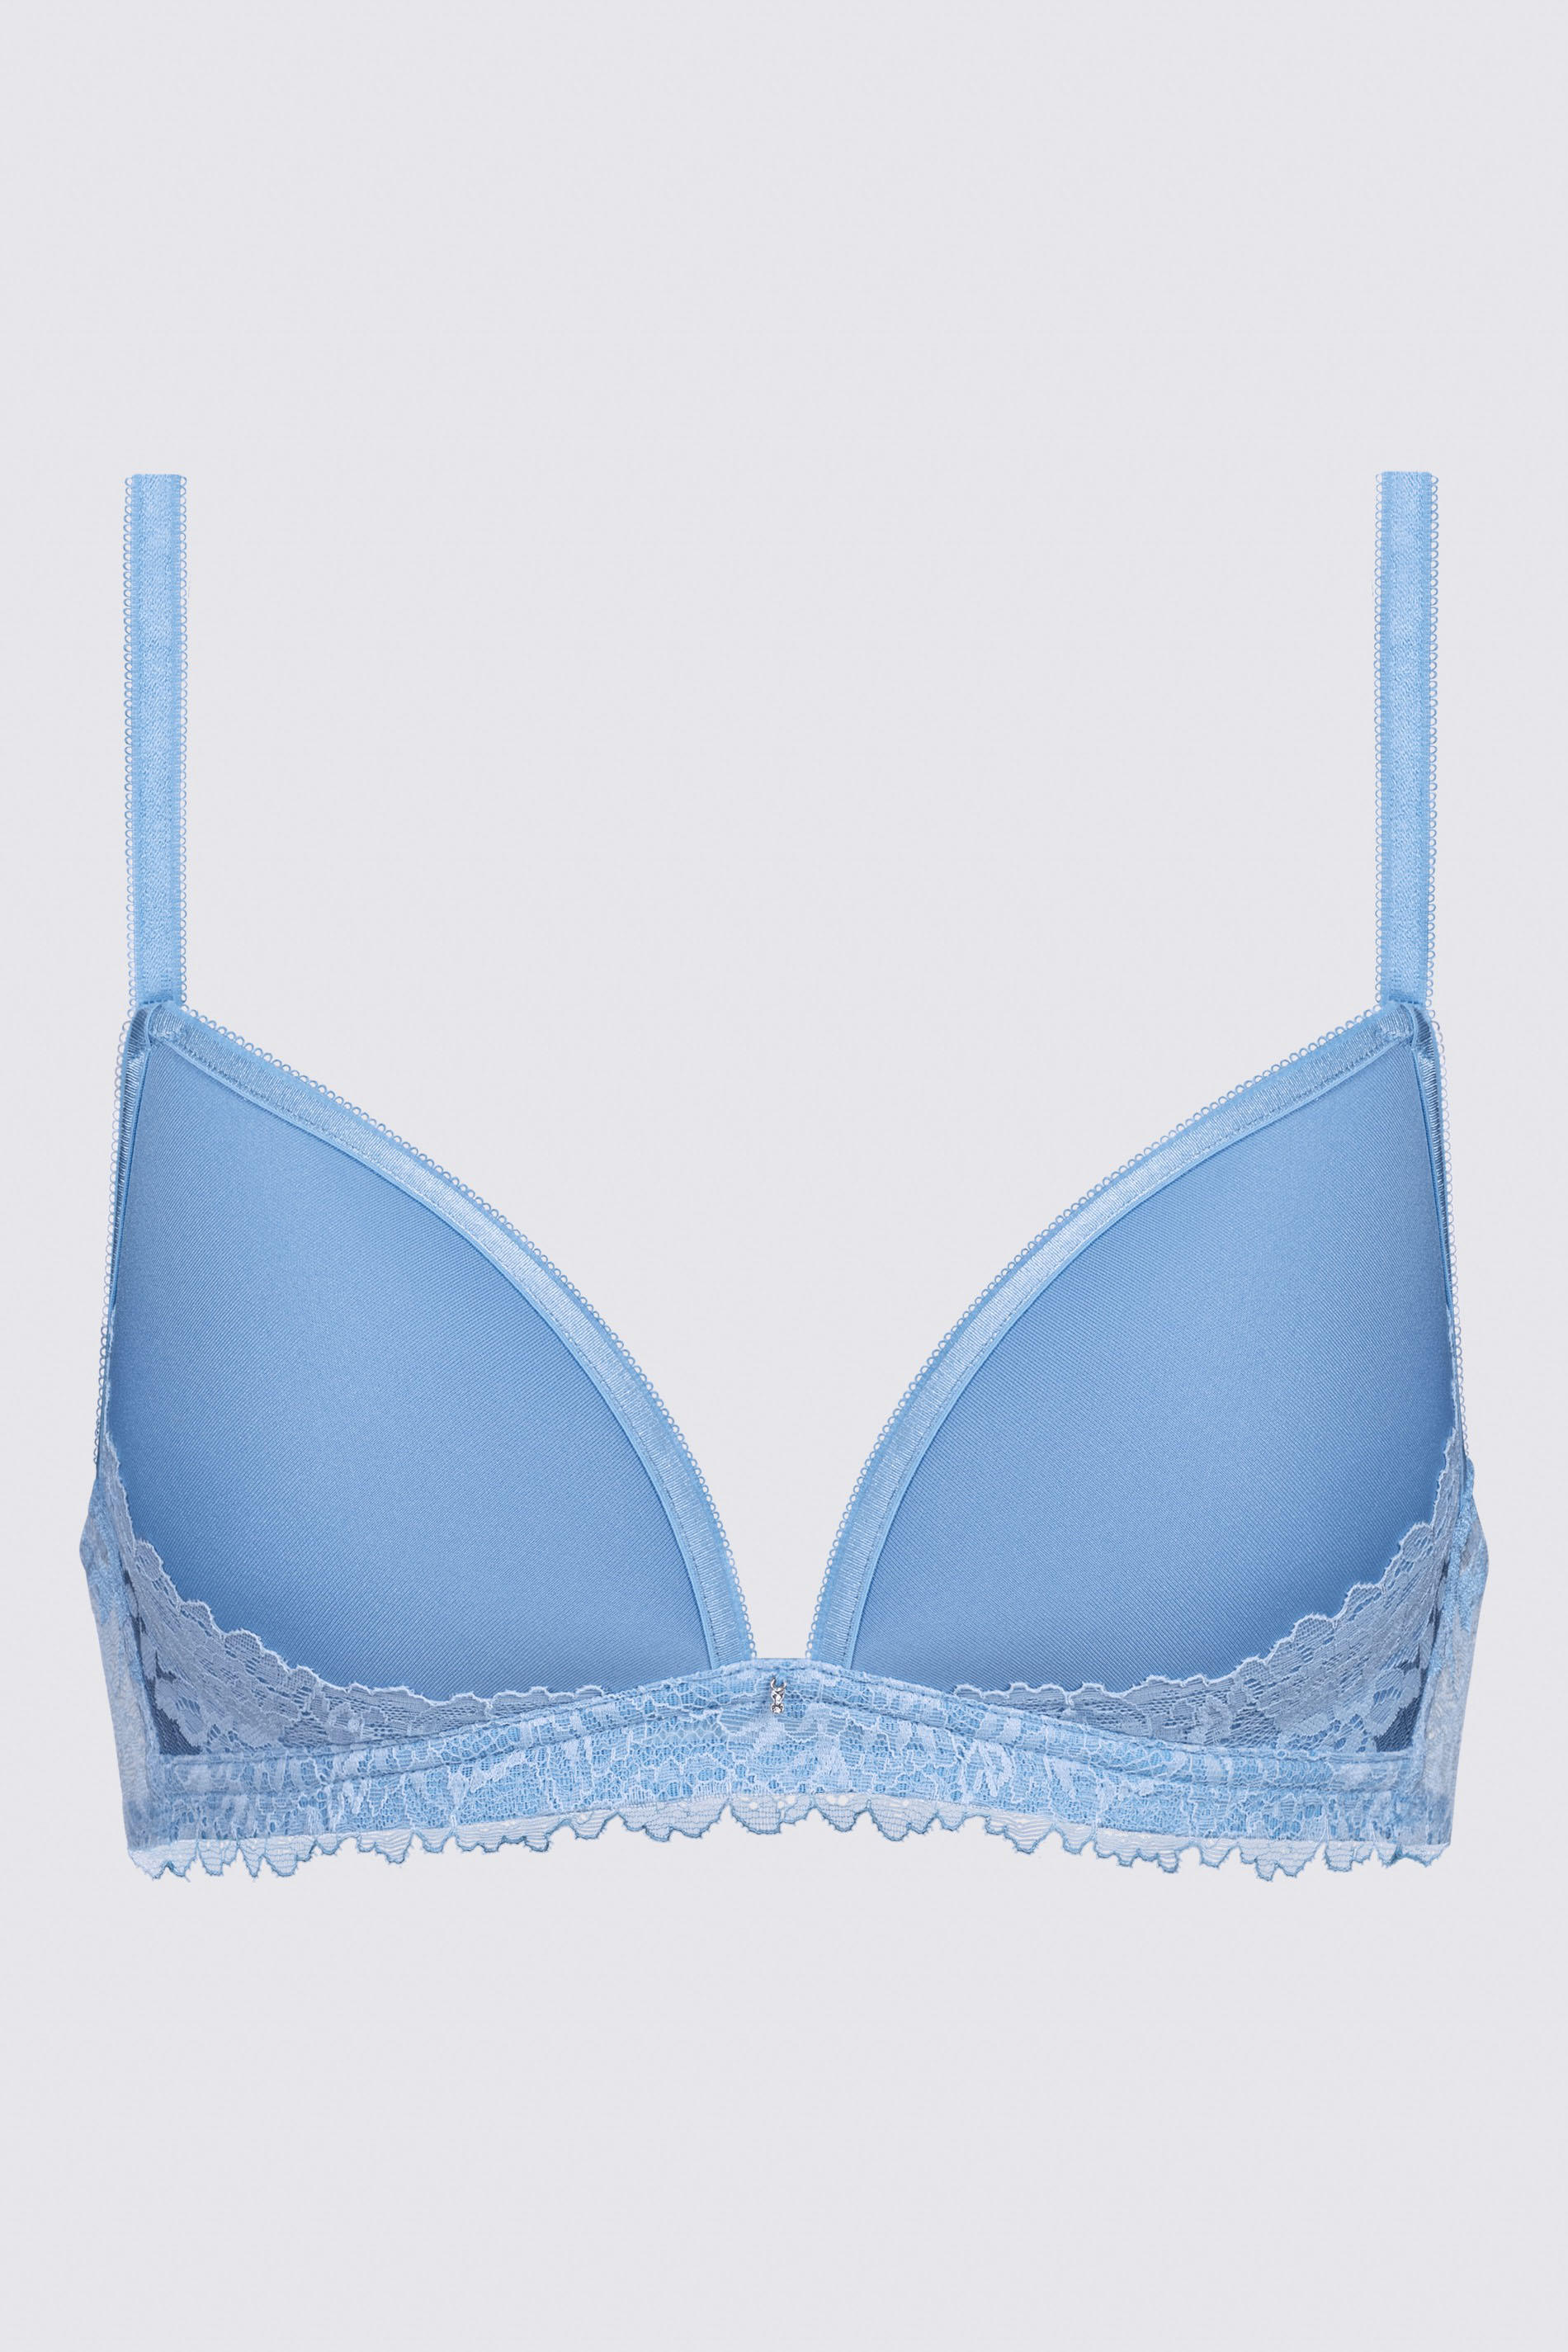 Spacer bra | no underwire Serie Luxurious Cut Out | mey®